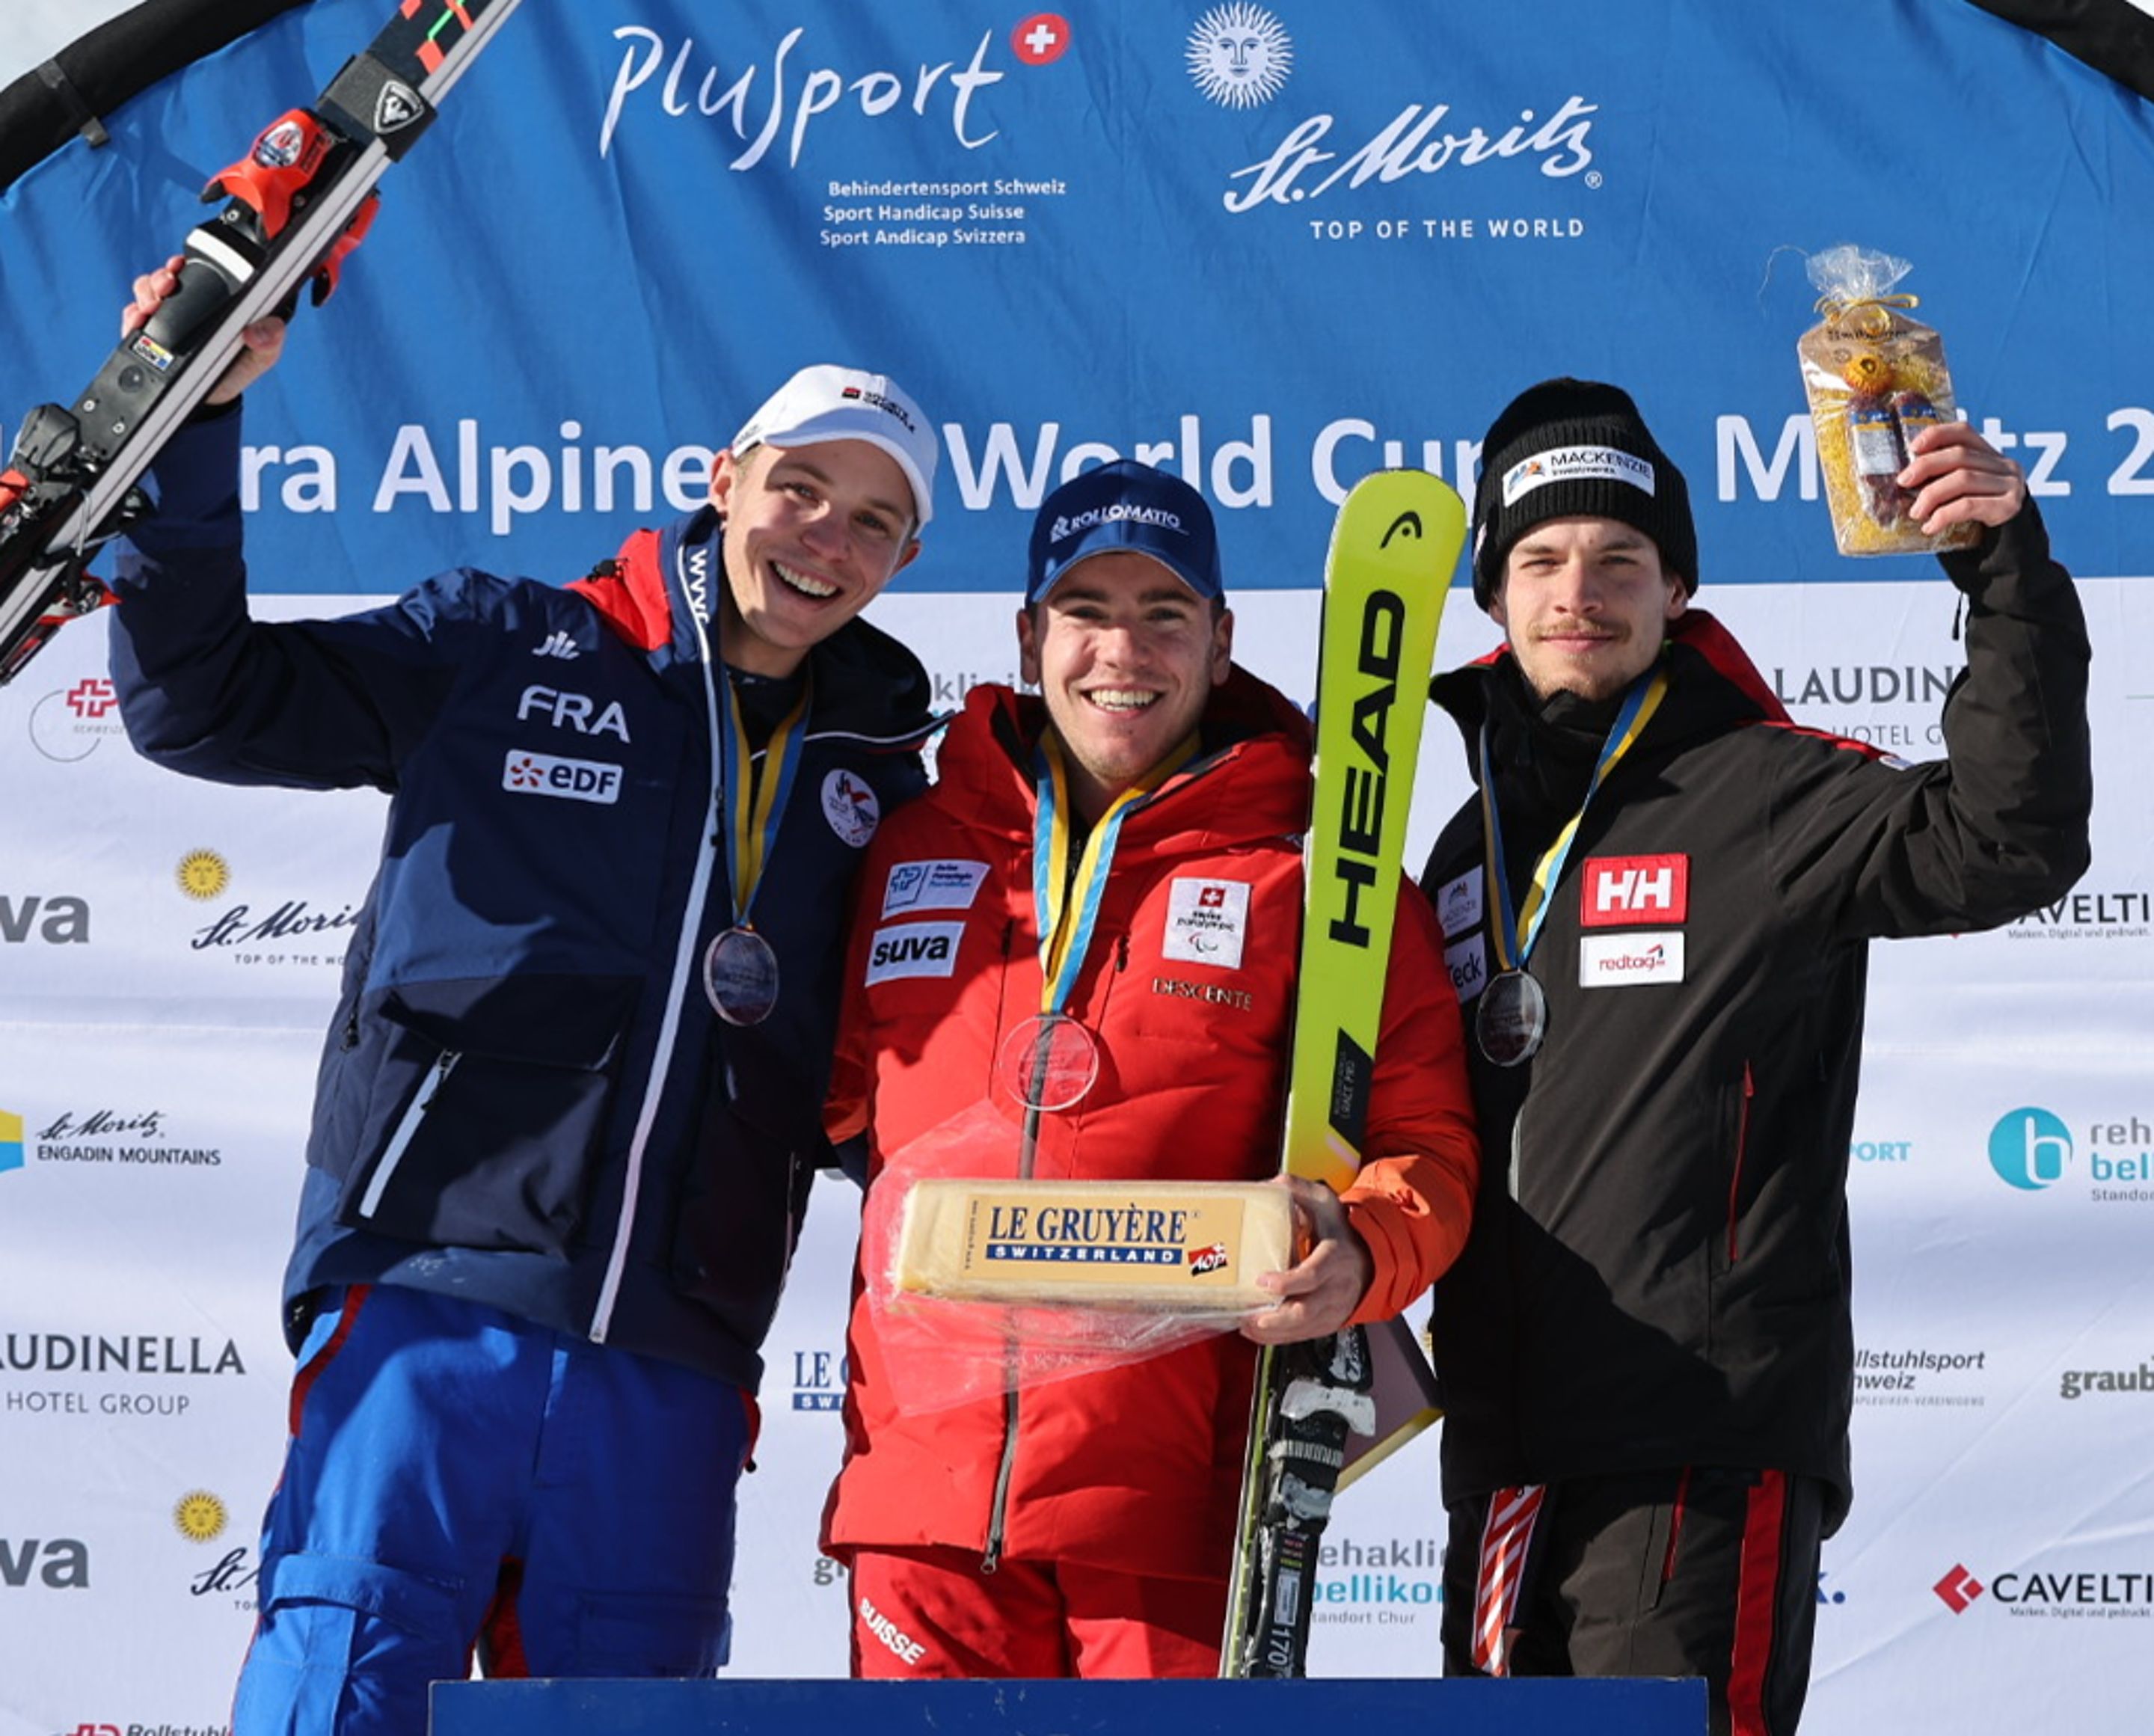 Podium day 1: (from left to right) Arthur Bauchet, Robin Cuche and Alexis Guimond